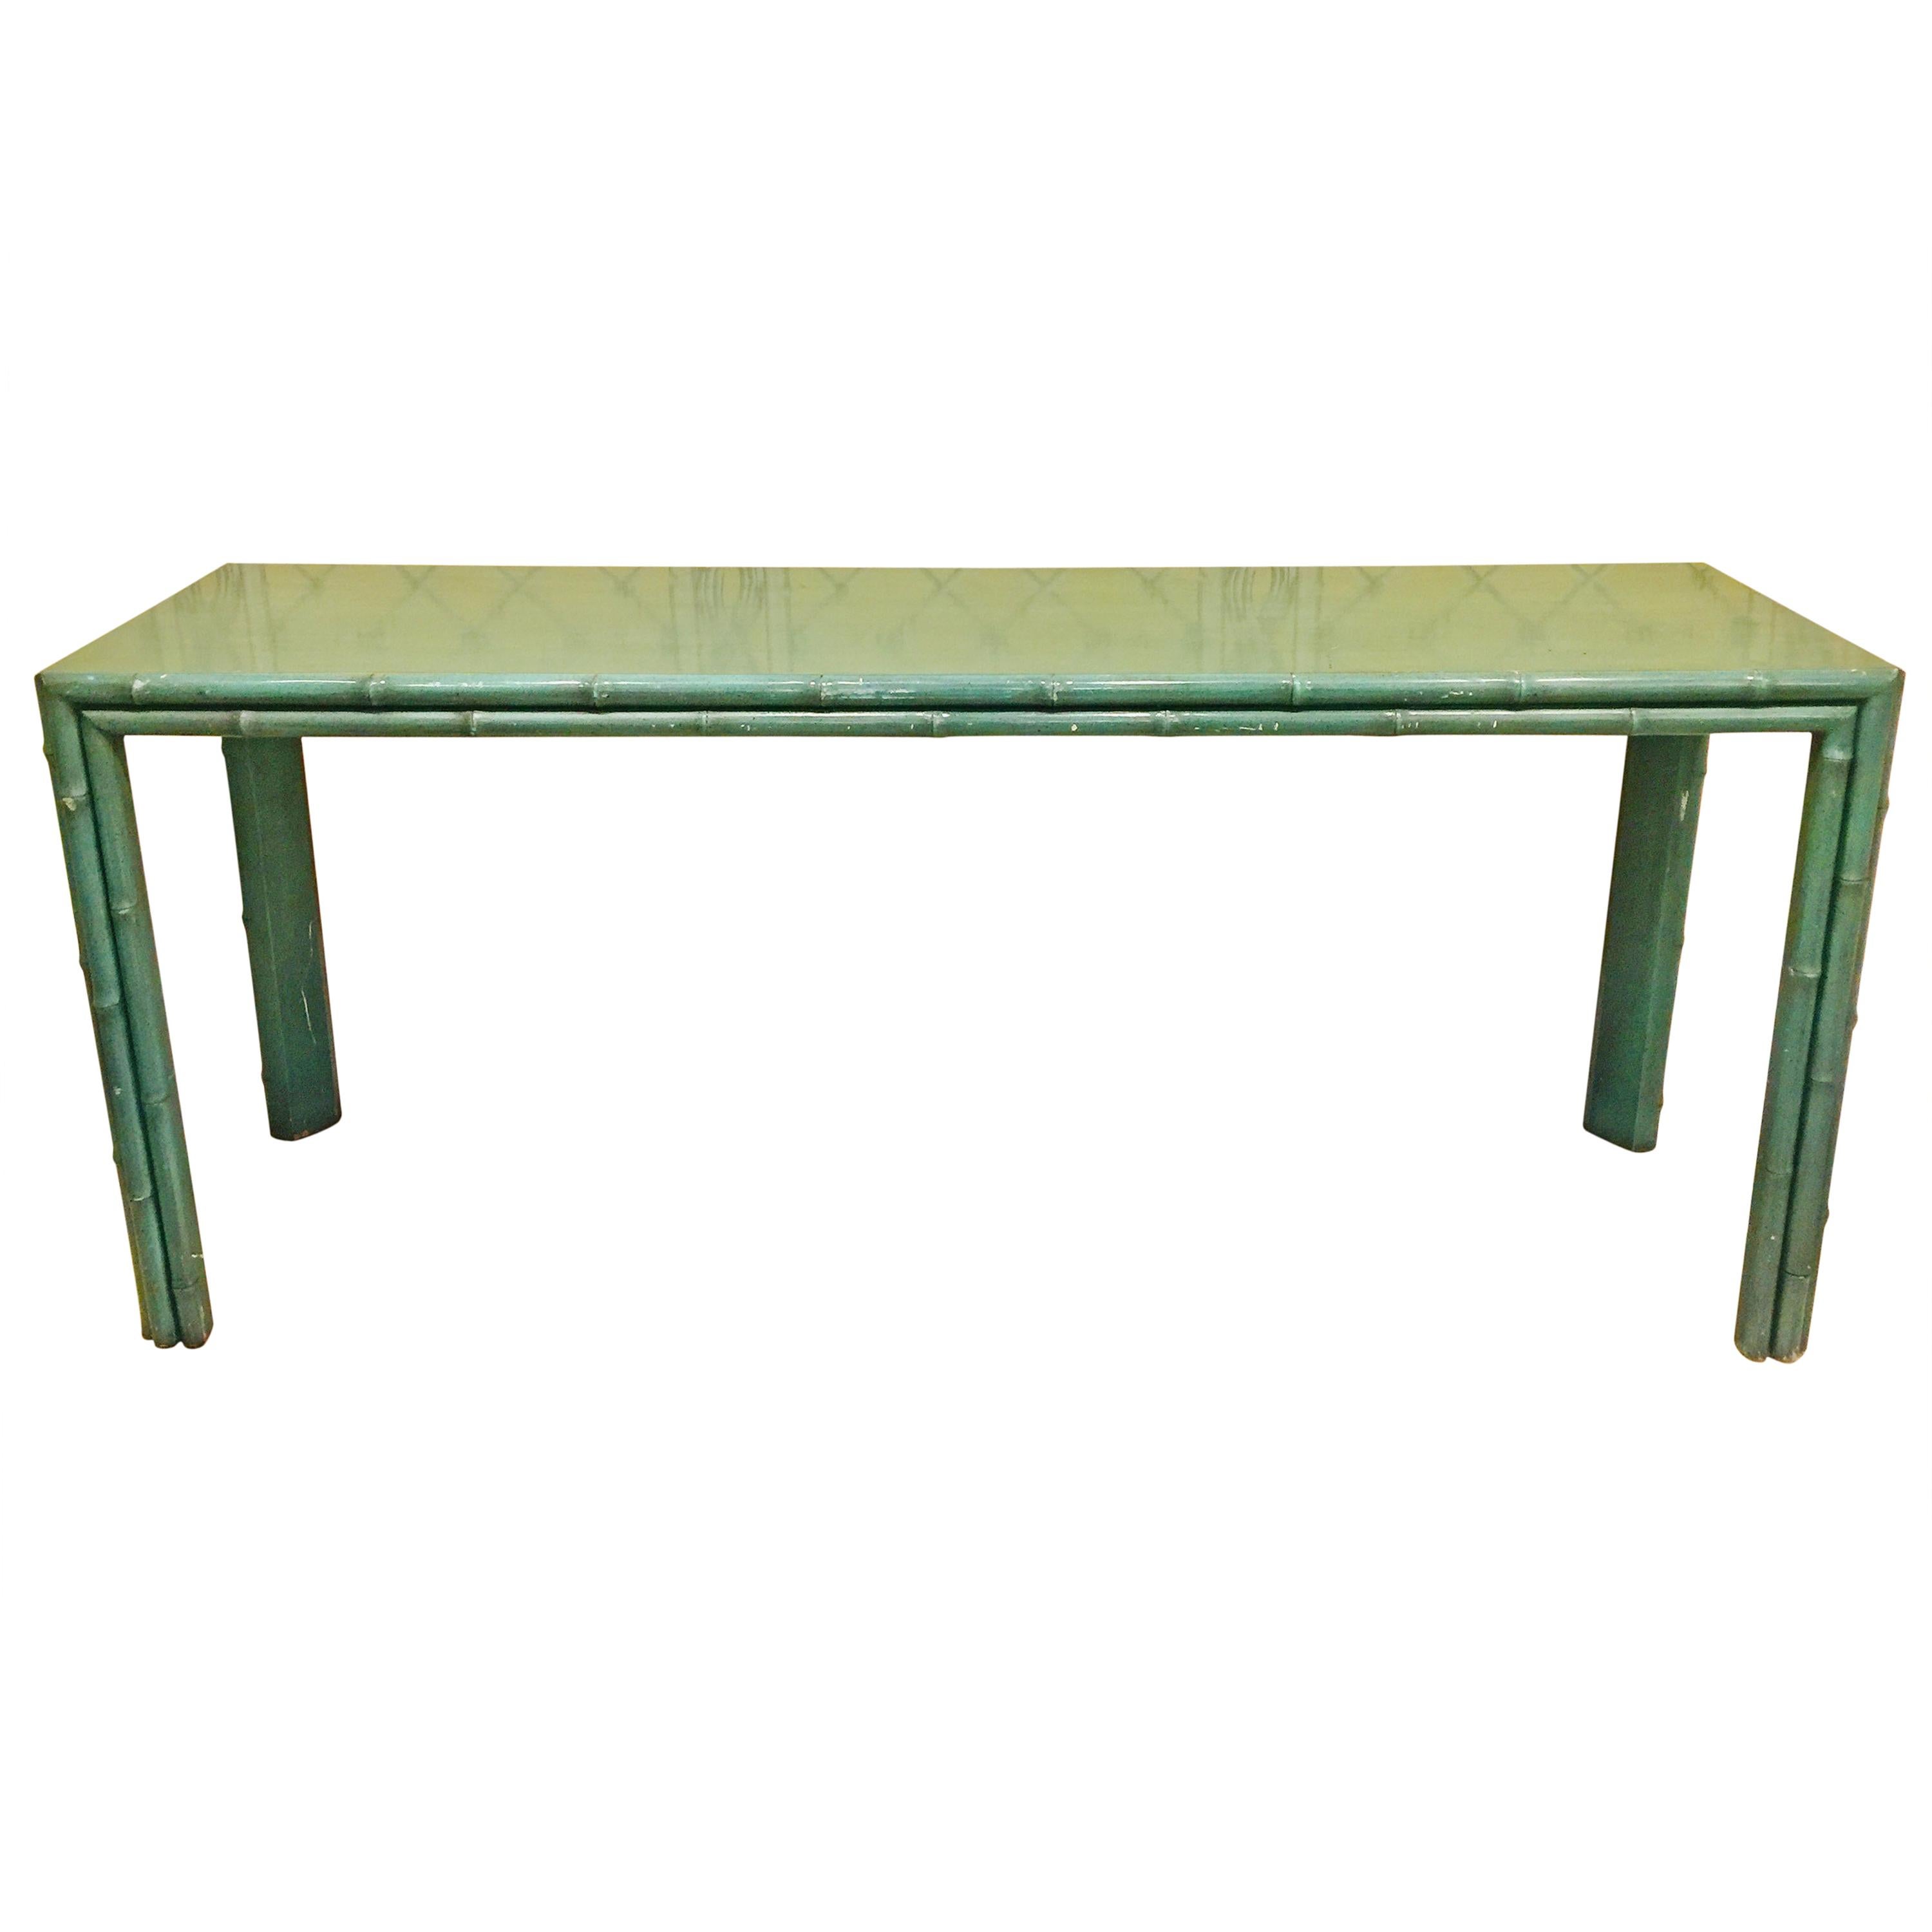 American Midcentury Green Painted Bamboo Style Console, circa 1960-1970 For Sale